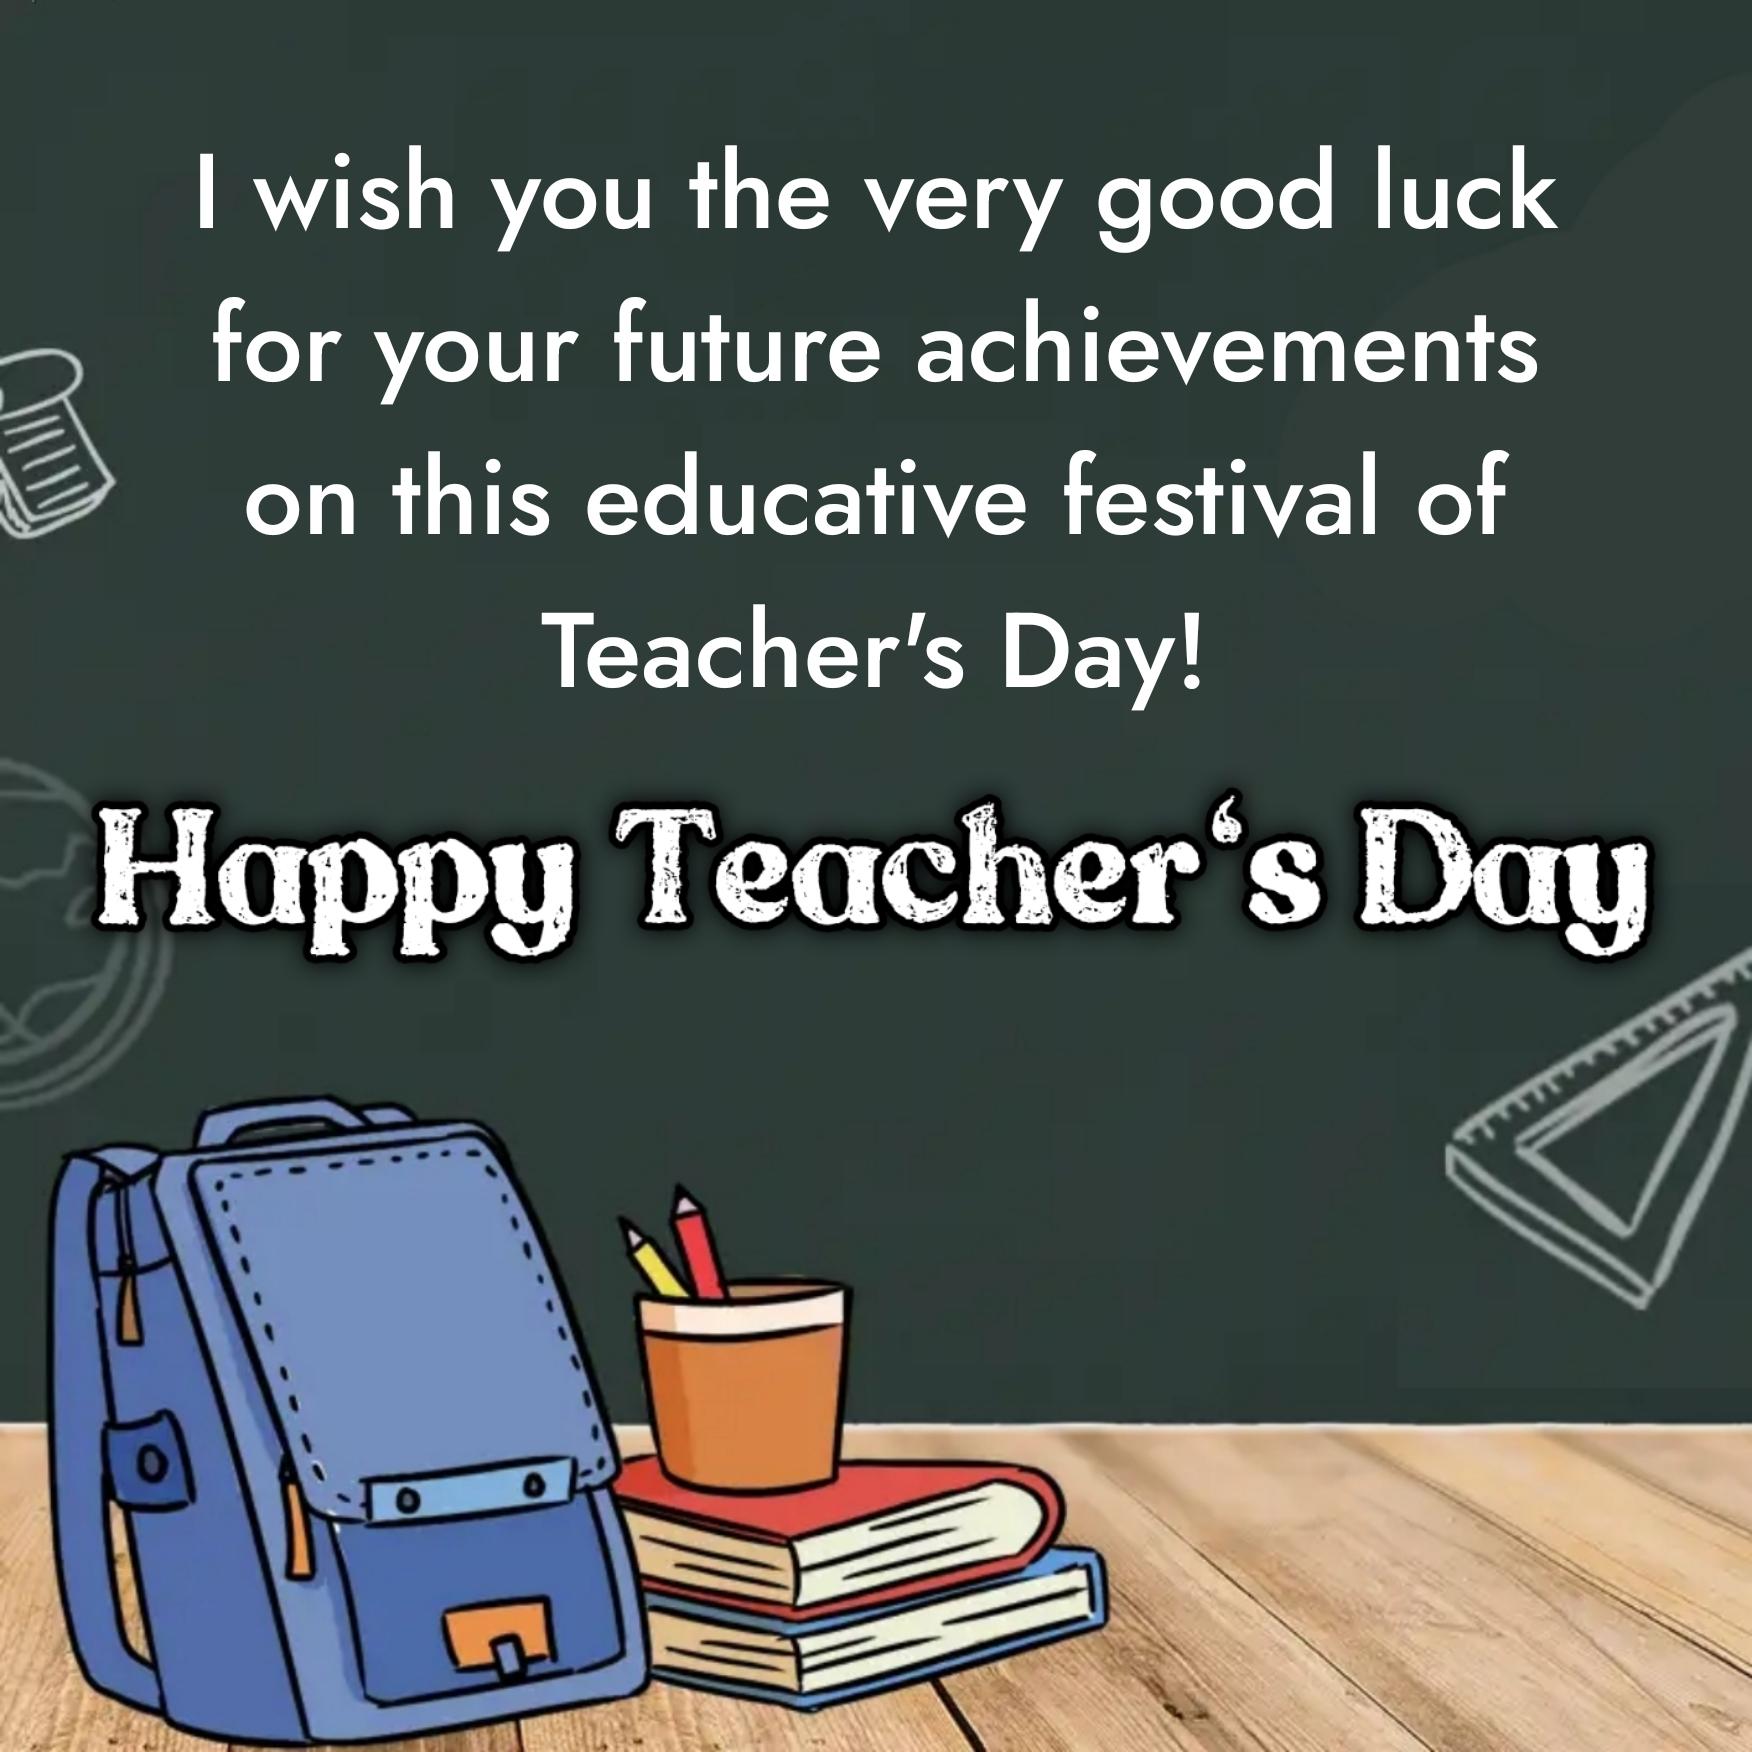 I wish you the very good luck for your future achievements